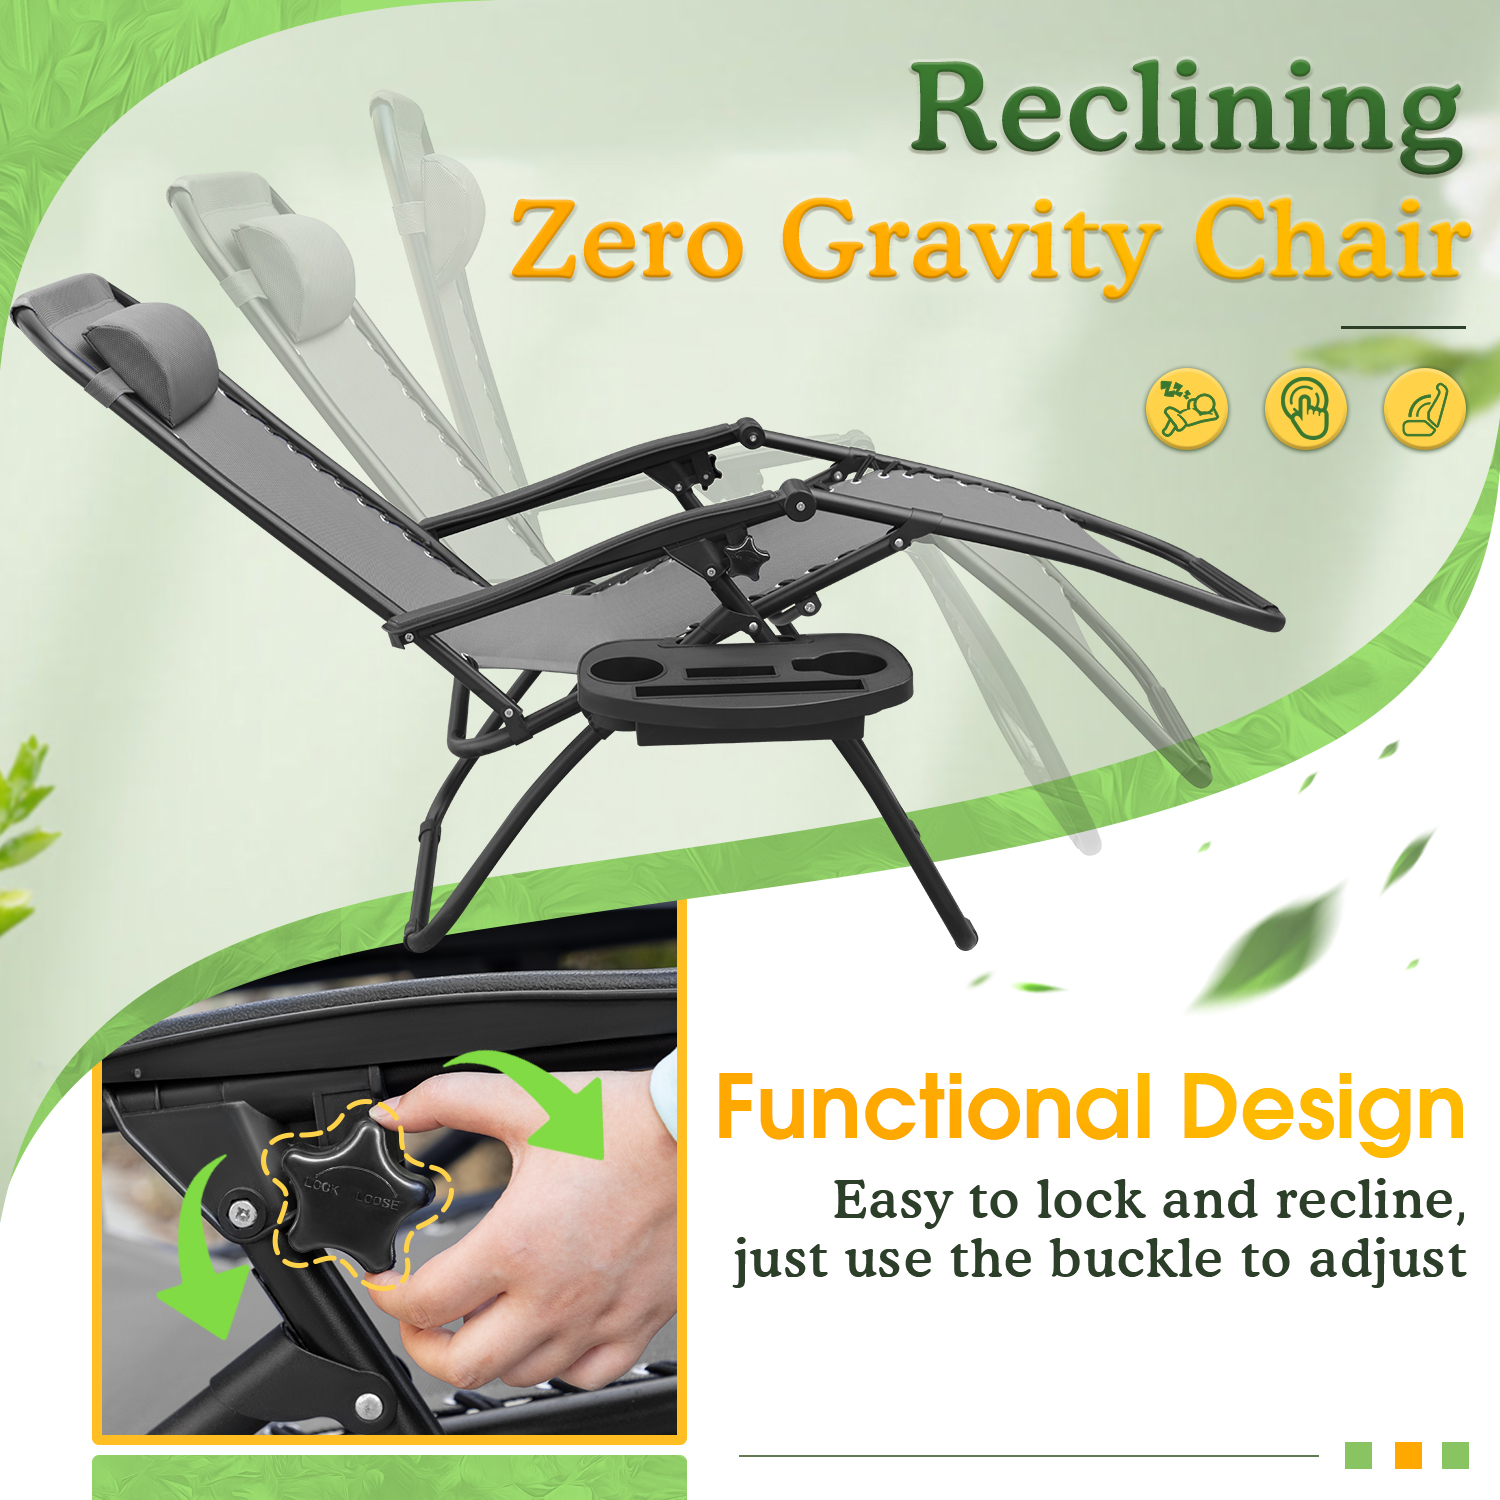 Lacoo Zero Gravity Reclining Outdoor Lounge Chair for 2 with Adjustable Pillow, 2 Pack, Gray - image 3 of 7